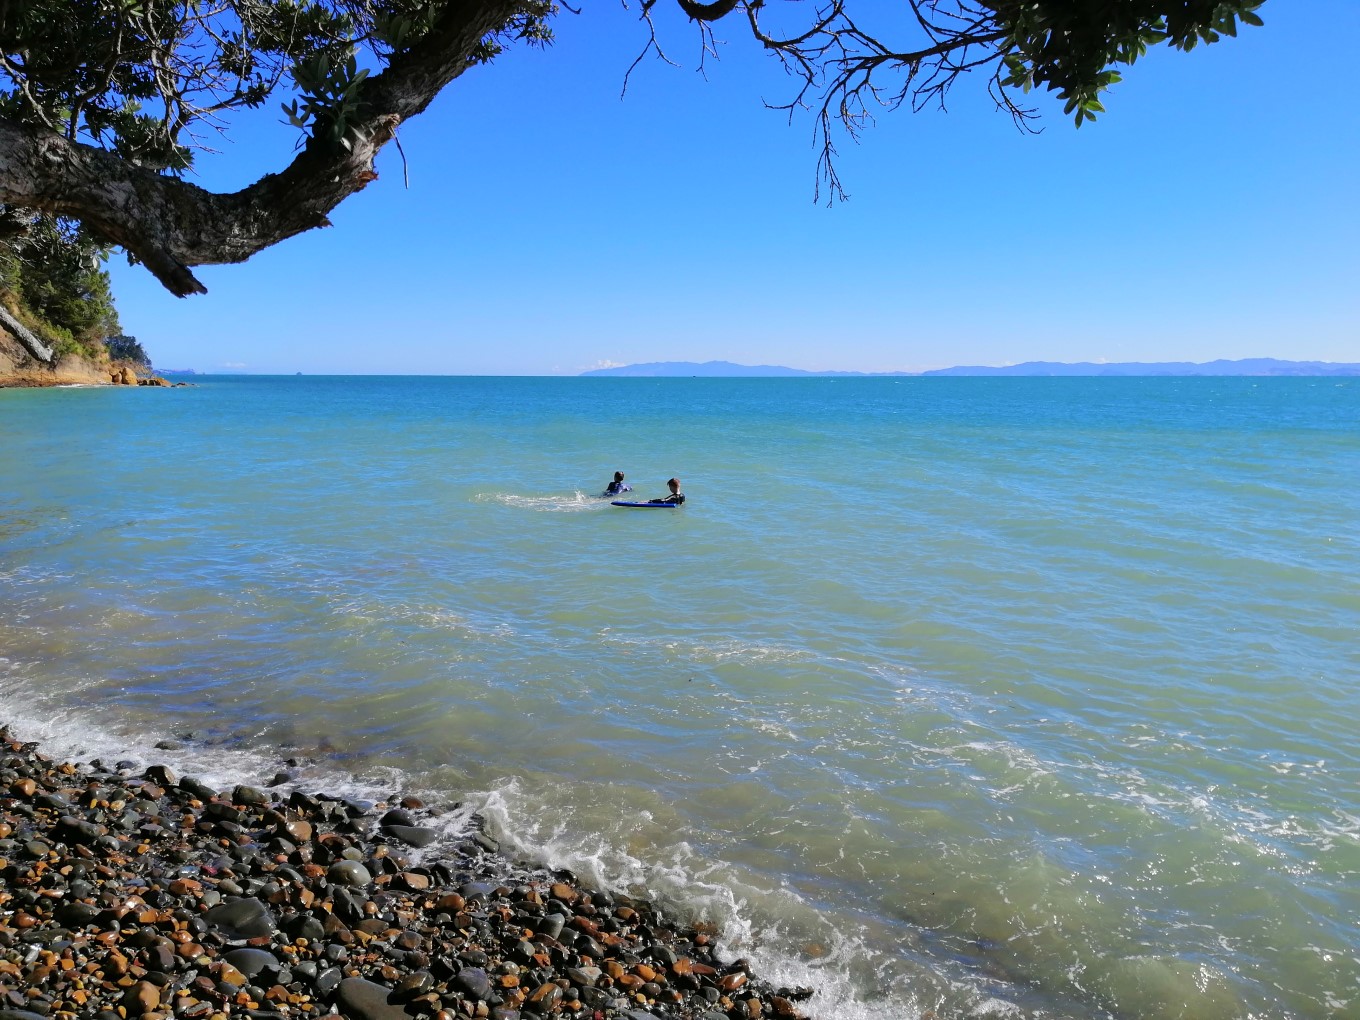 The Beachfront Campground at Tāpapakanga Regional Park overlooks the Firth of Thames.